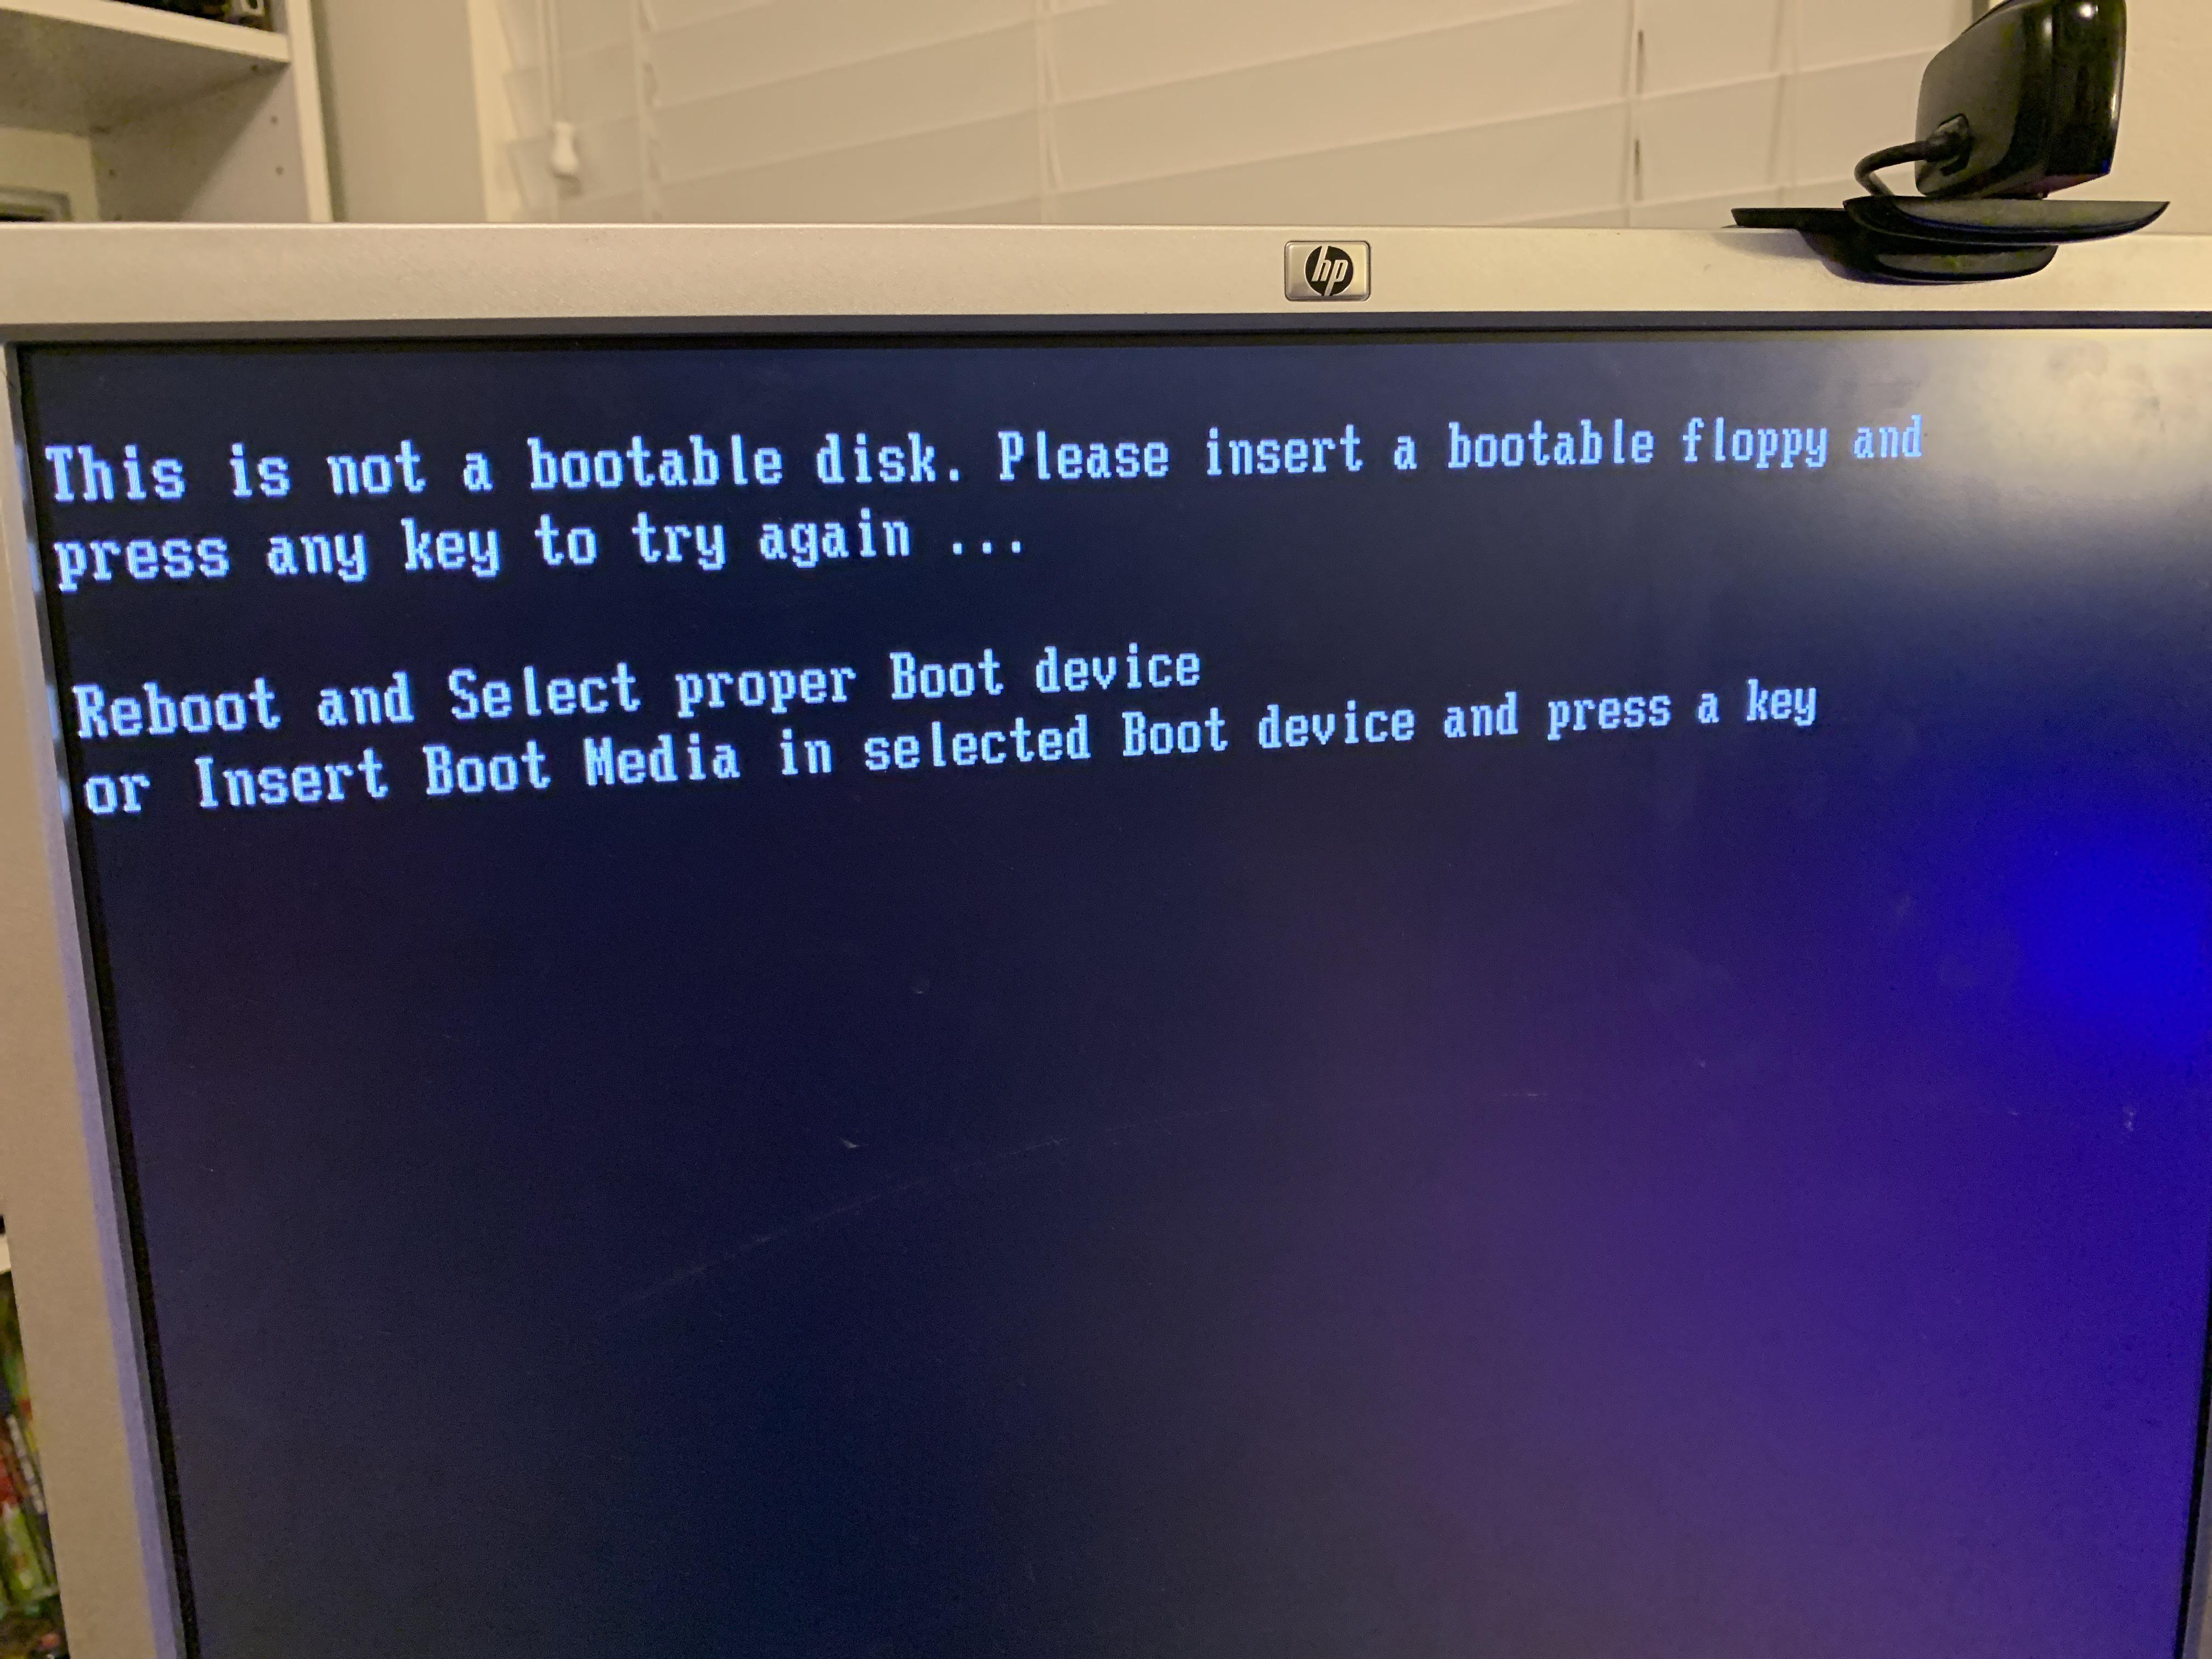 Insert the Windows installation disc or USB into your computer and restart it.
Press any key to boot from the installation media.